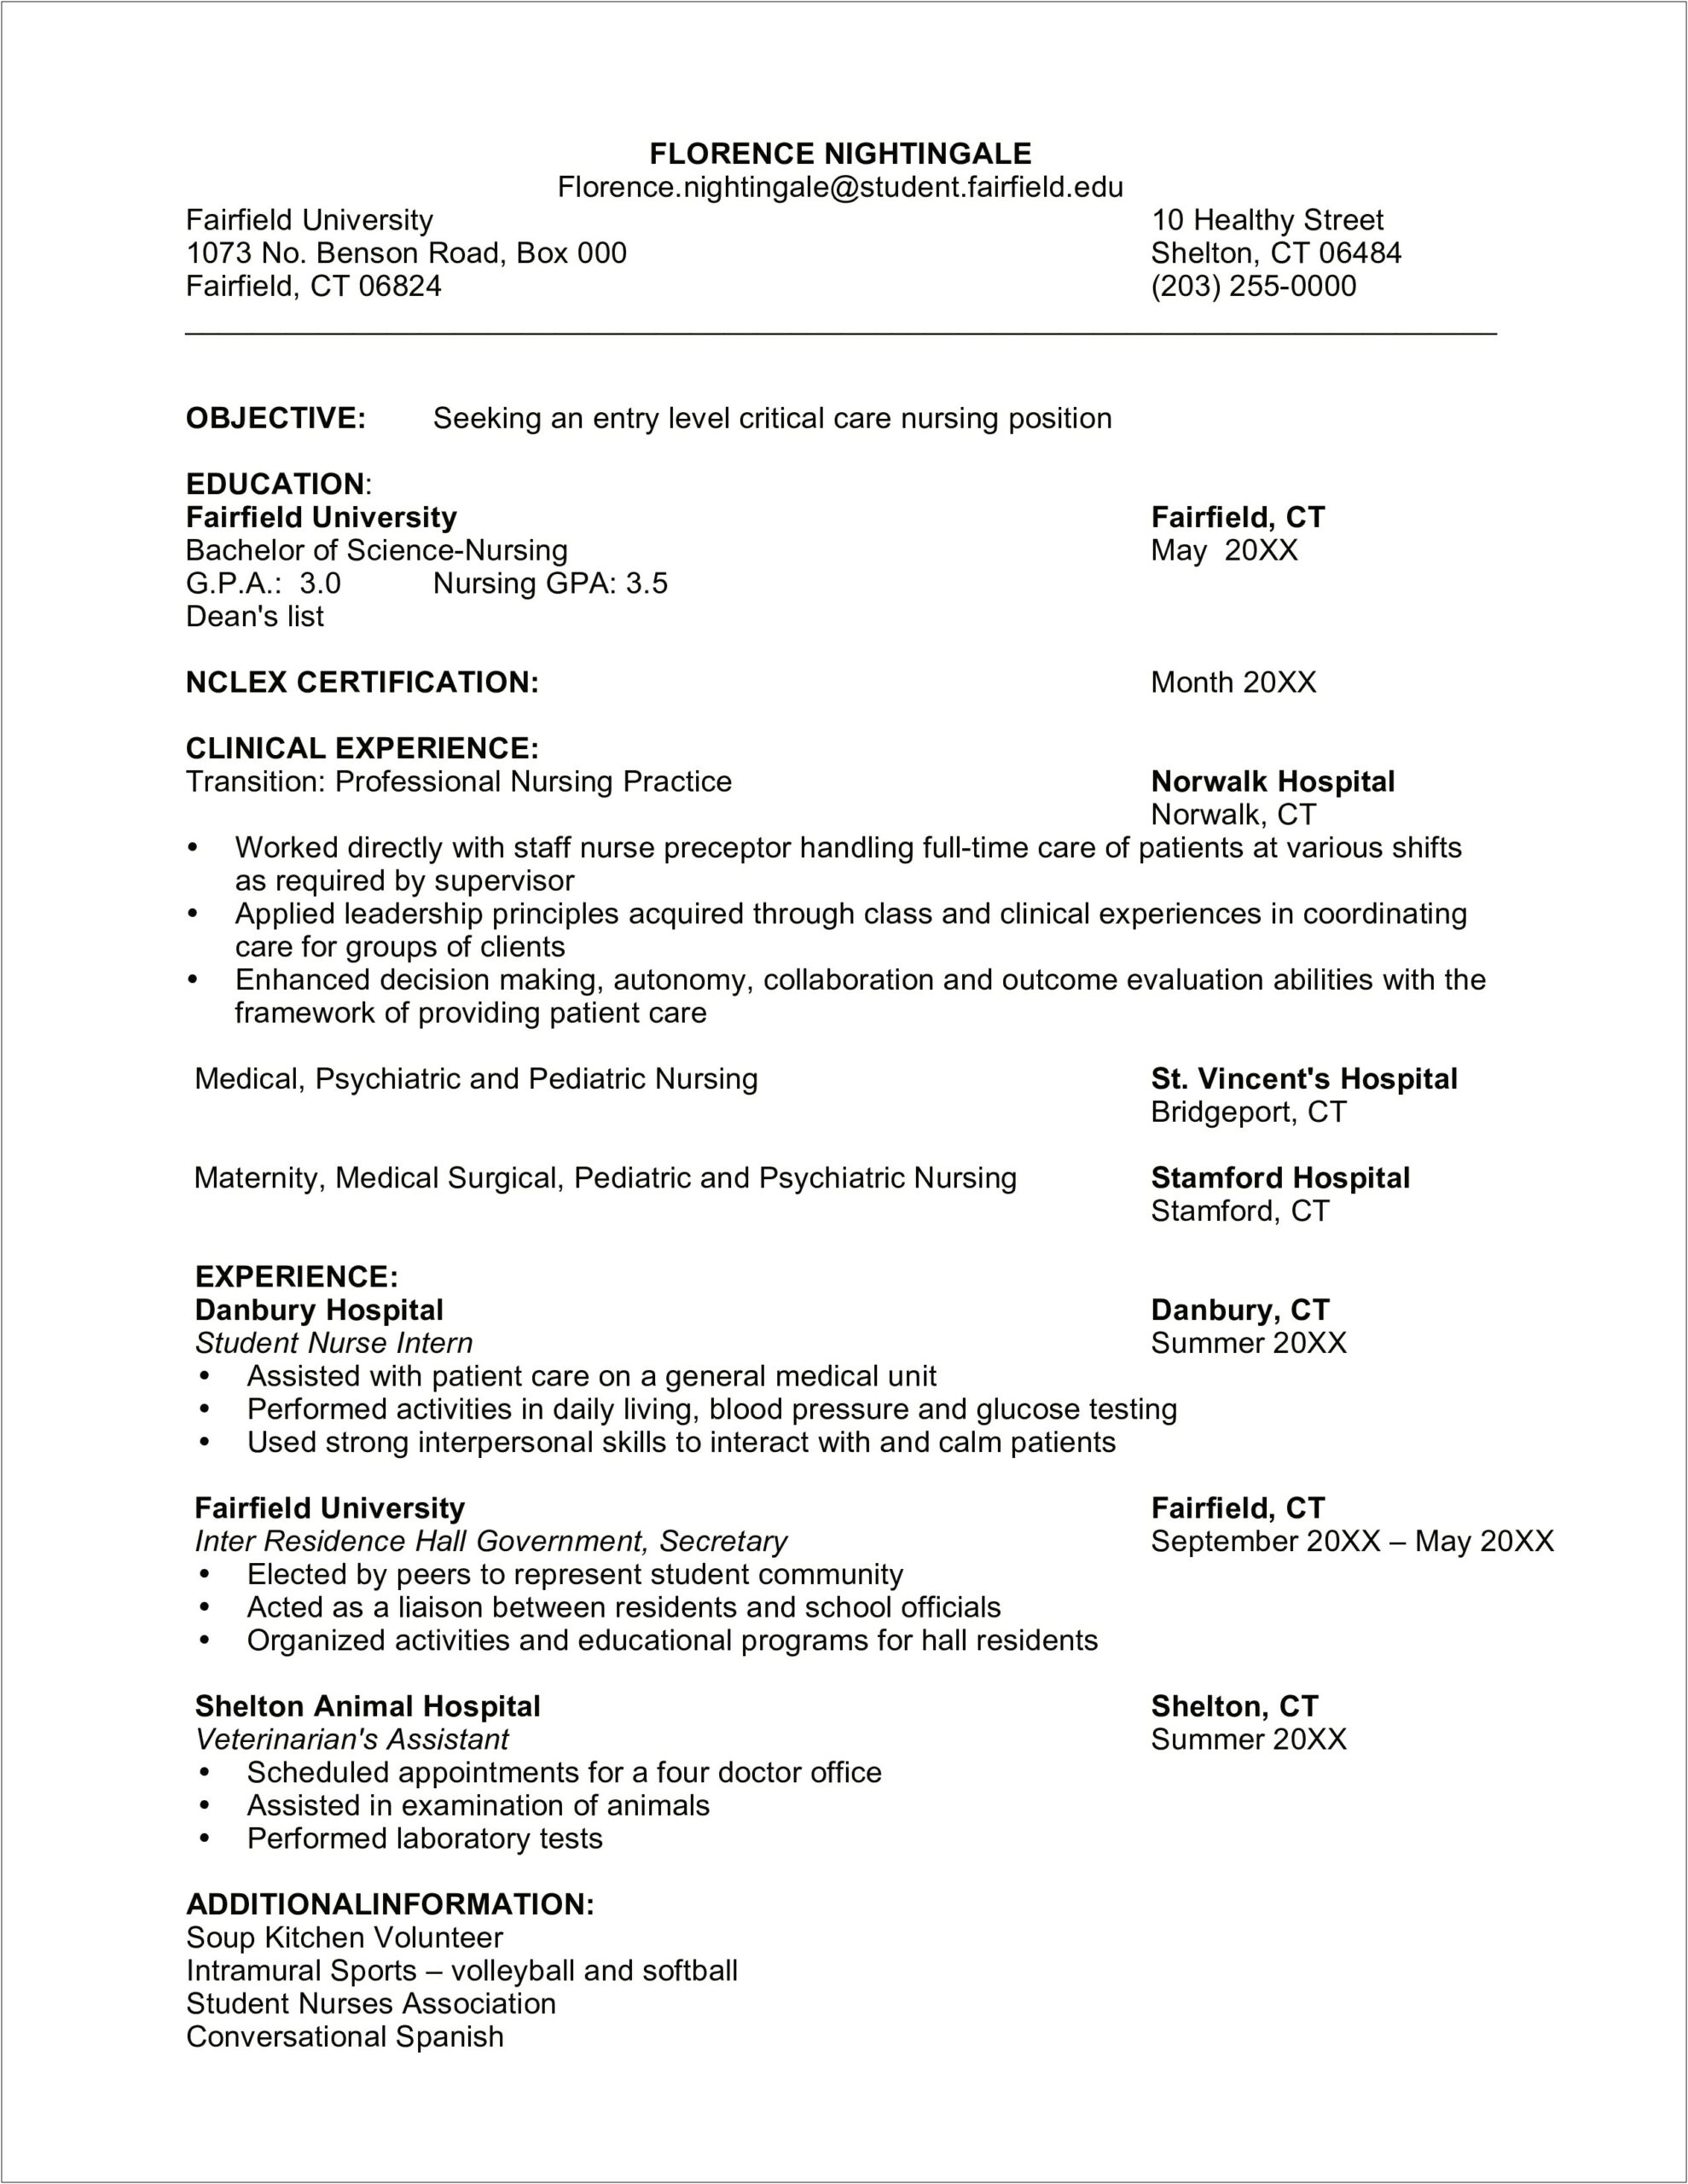 Sample Nursing Student Resume With Clinical Experience